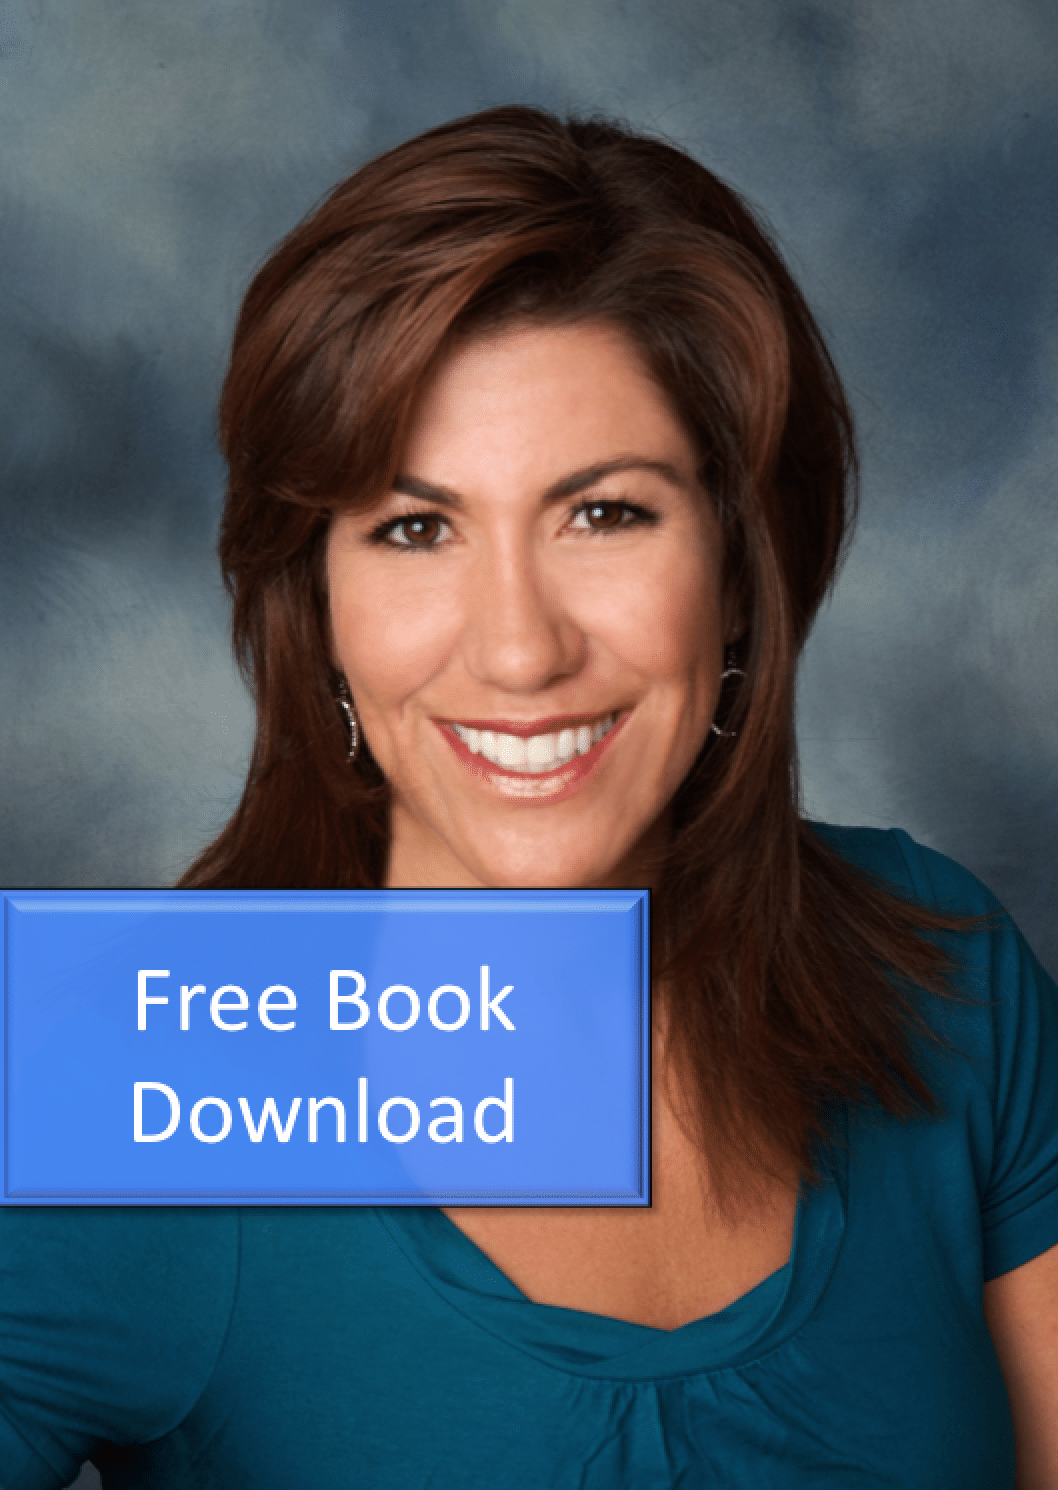 [Free Book Download] Boost Sales from Lisa Sasevich